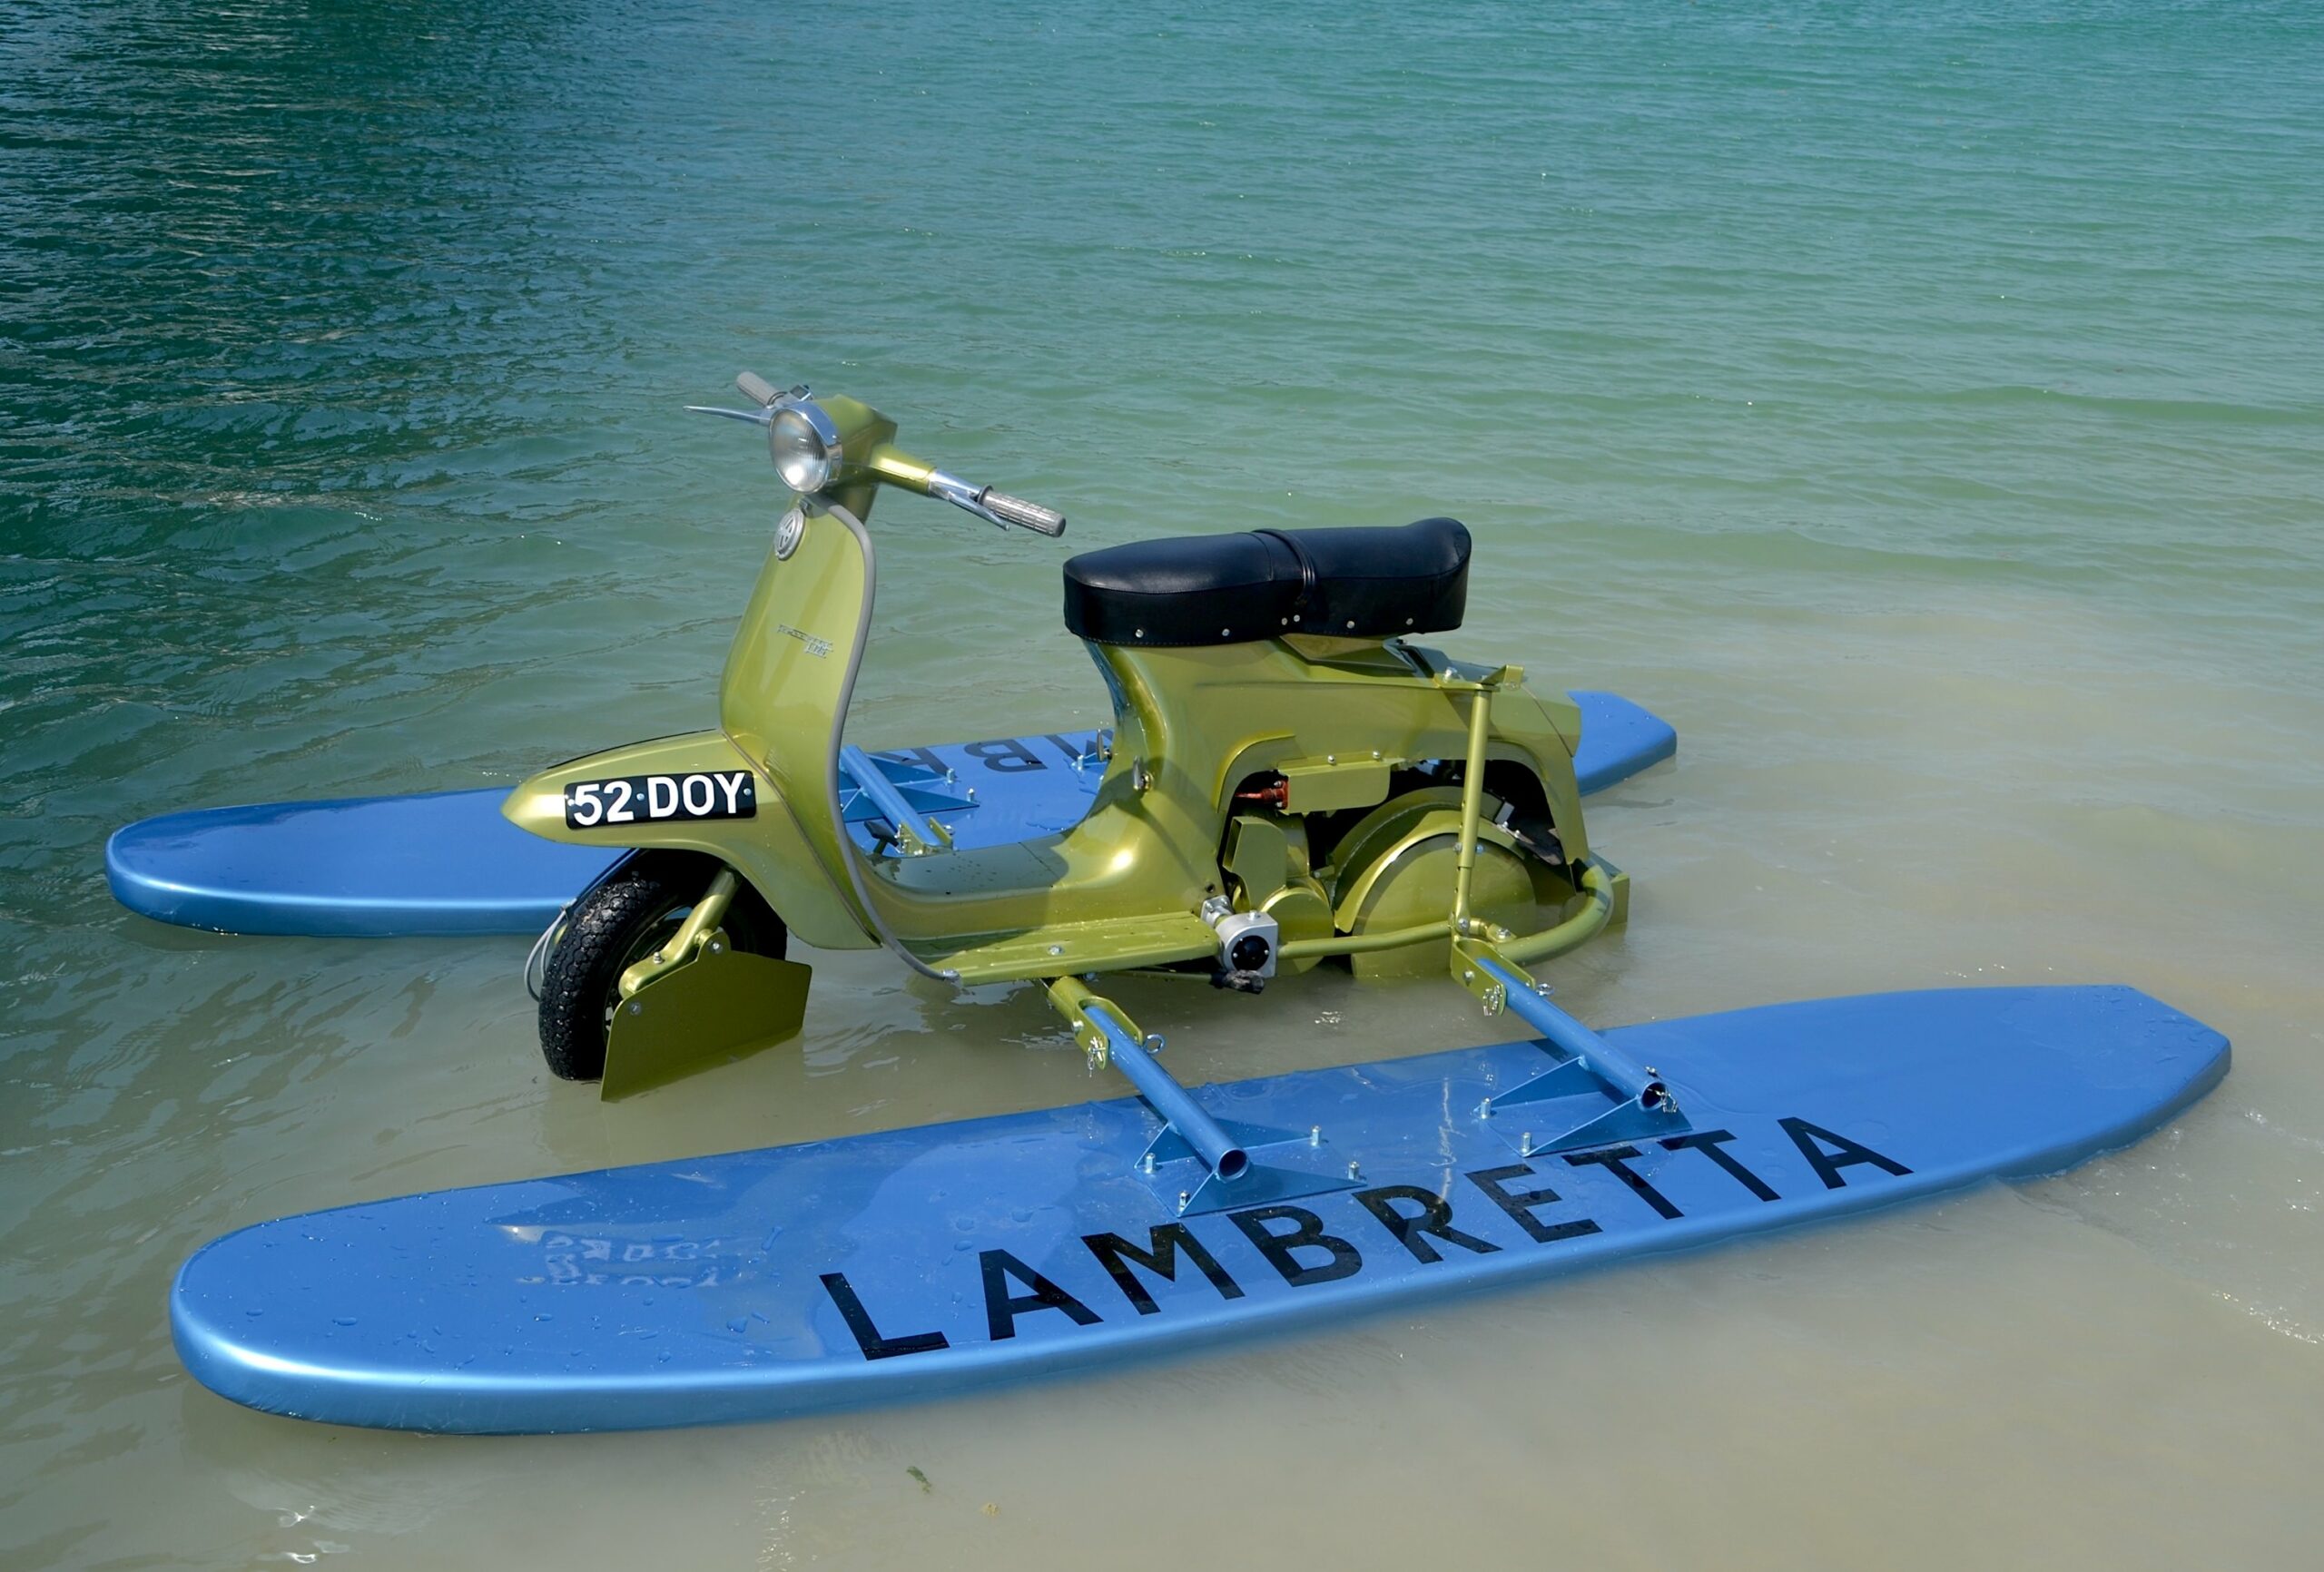 The Only Lambretta Amphi-Scooter In The World Is For Sale